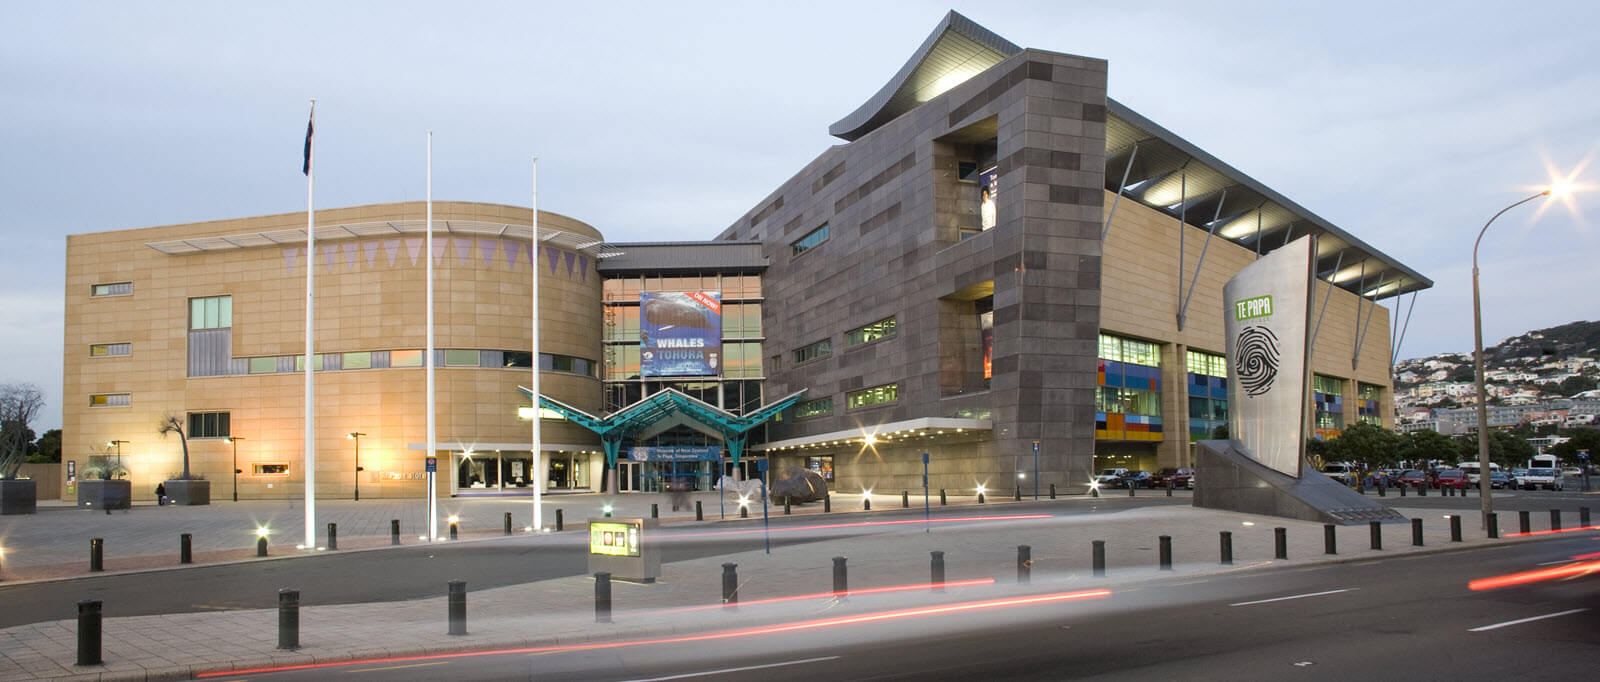 things to do in Wellington: Discover Stories at Te Papa